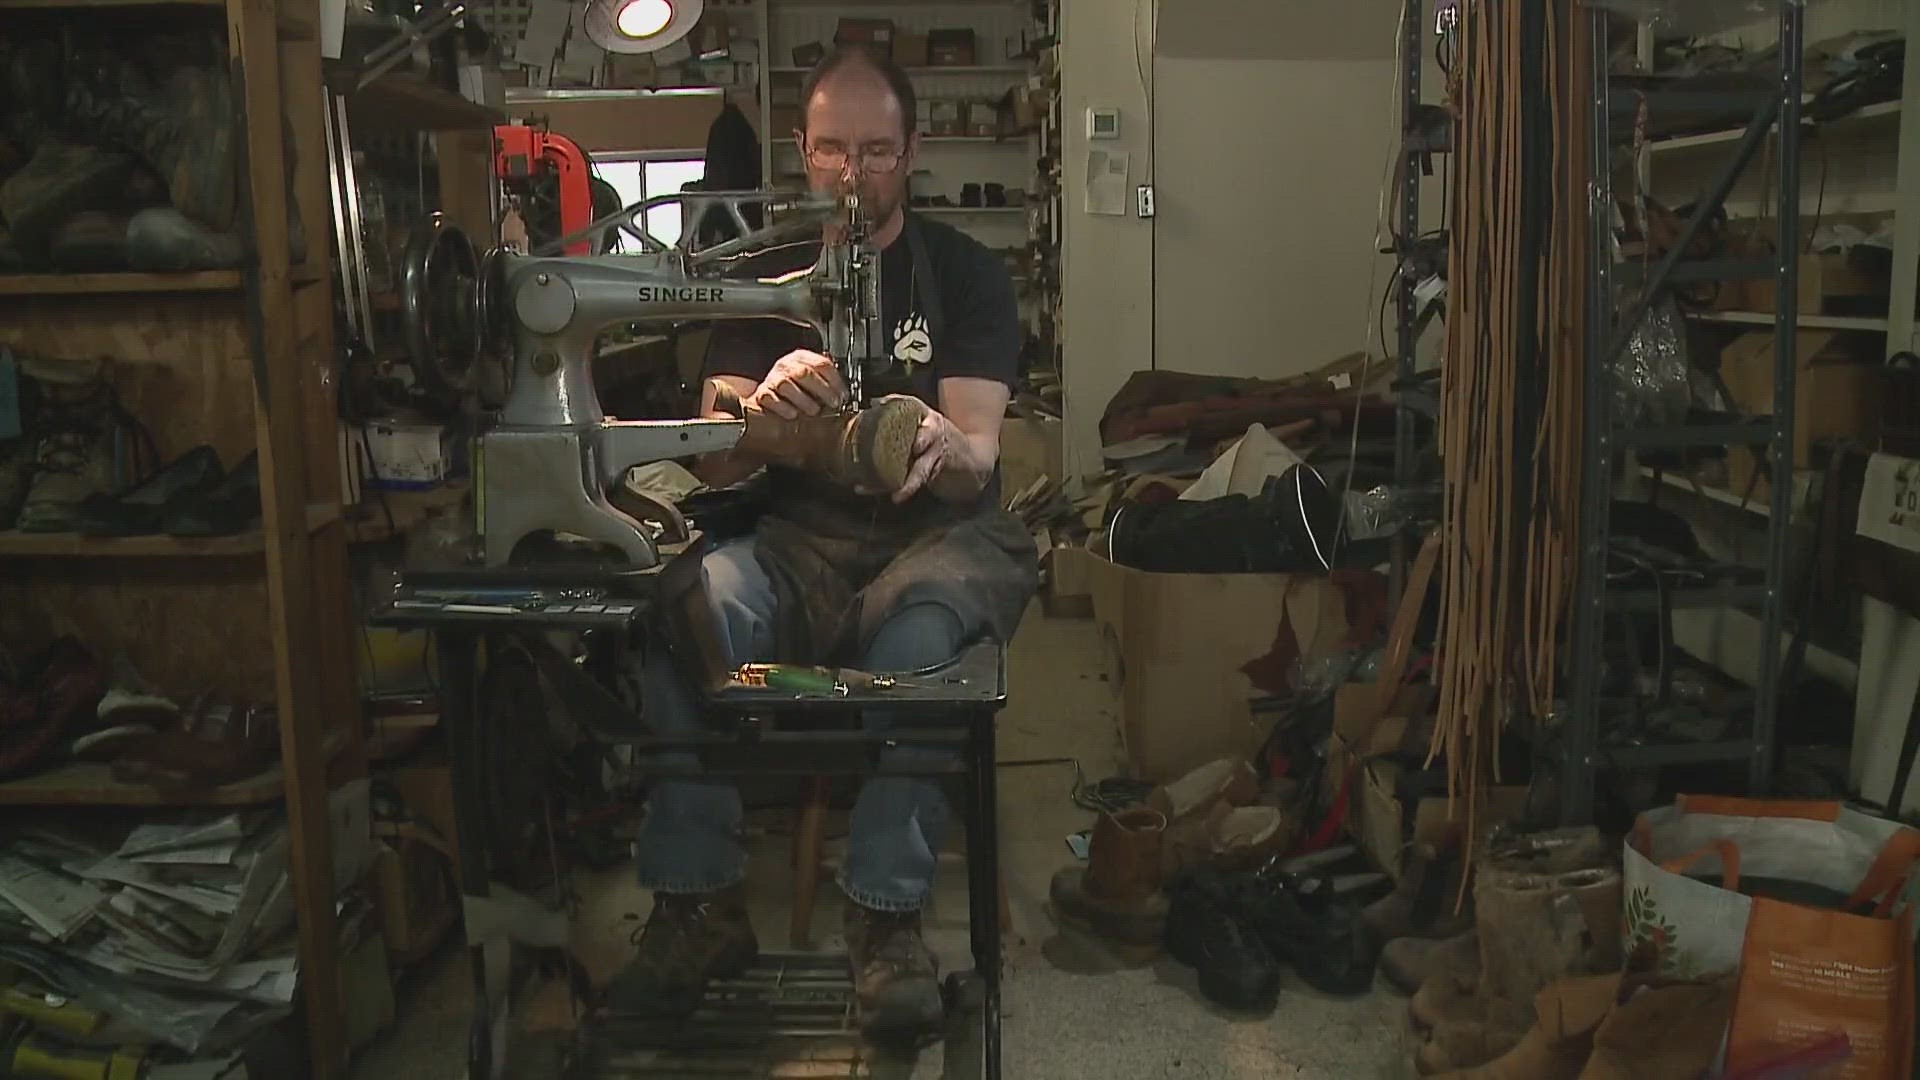 Tom LaCasse has been repairing shoes in Augusta for nearly 40 years.